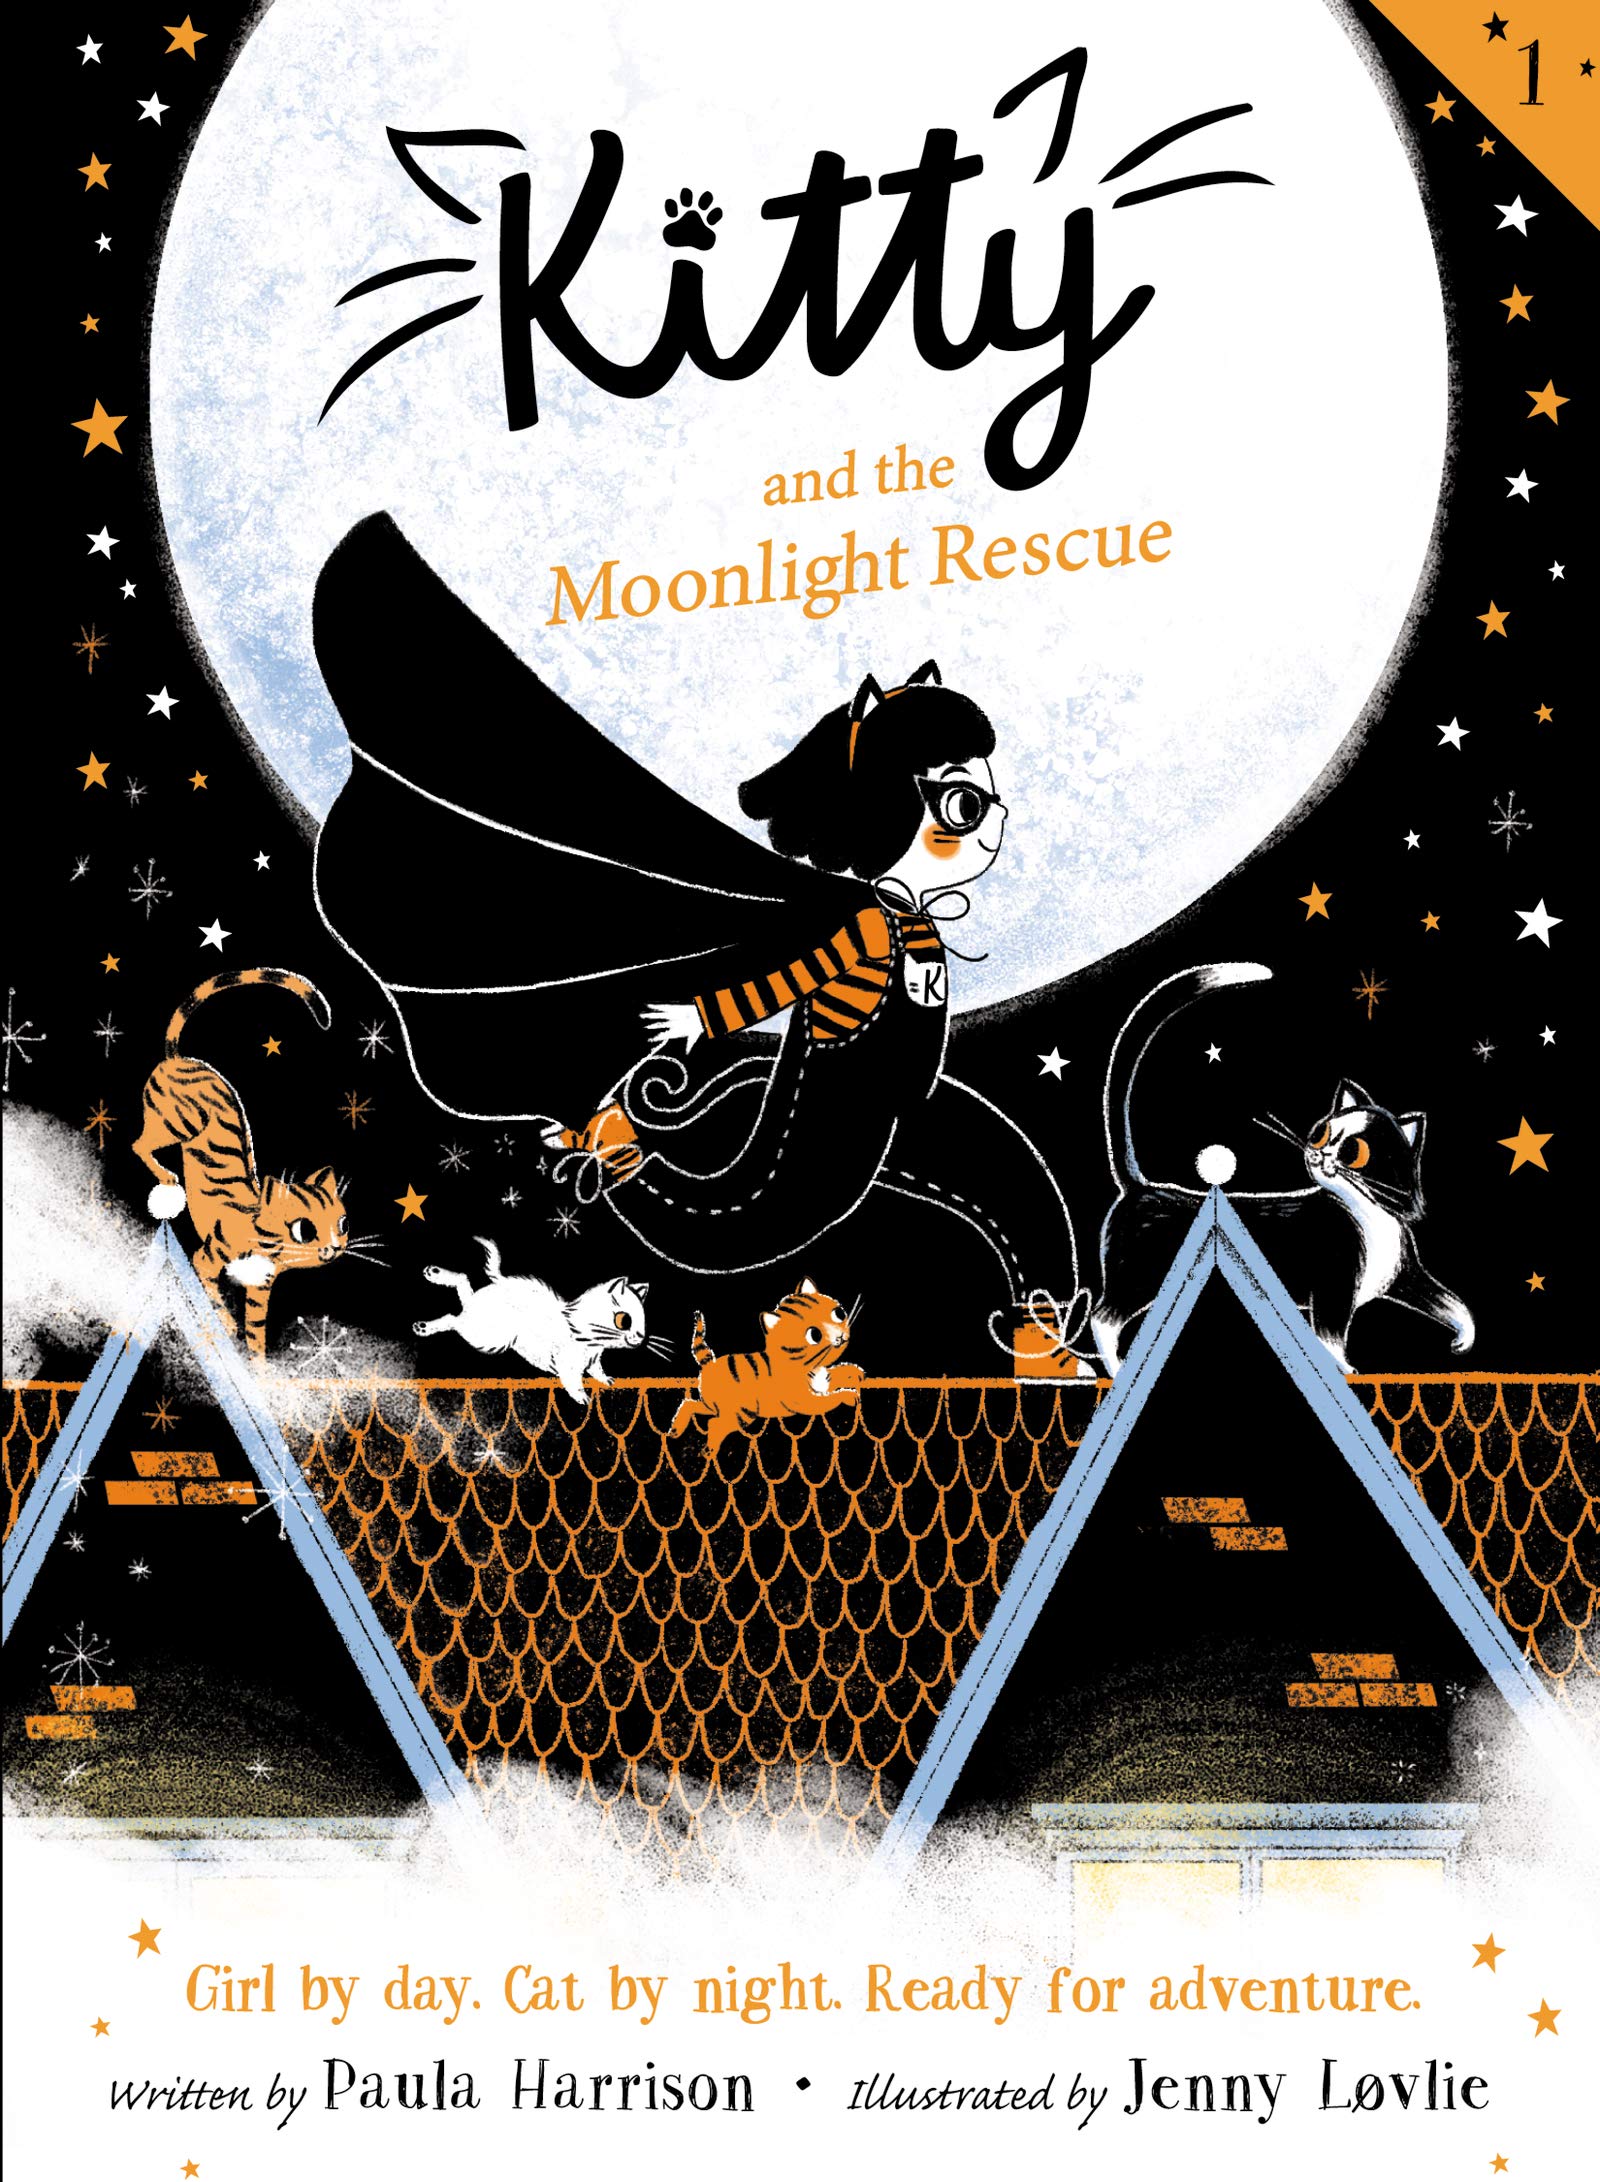 Cover of Kitty and the Moonlight Rescue by Paula Harrison, showing a girl in dark clothes with a cat-ear headband and black cape walking on a rooftop with cats. The background is a black sky with white & orange stars and a large white full moon.